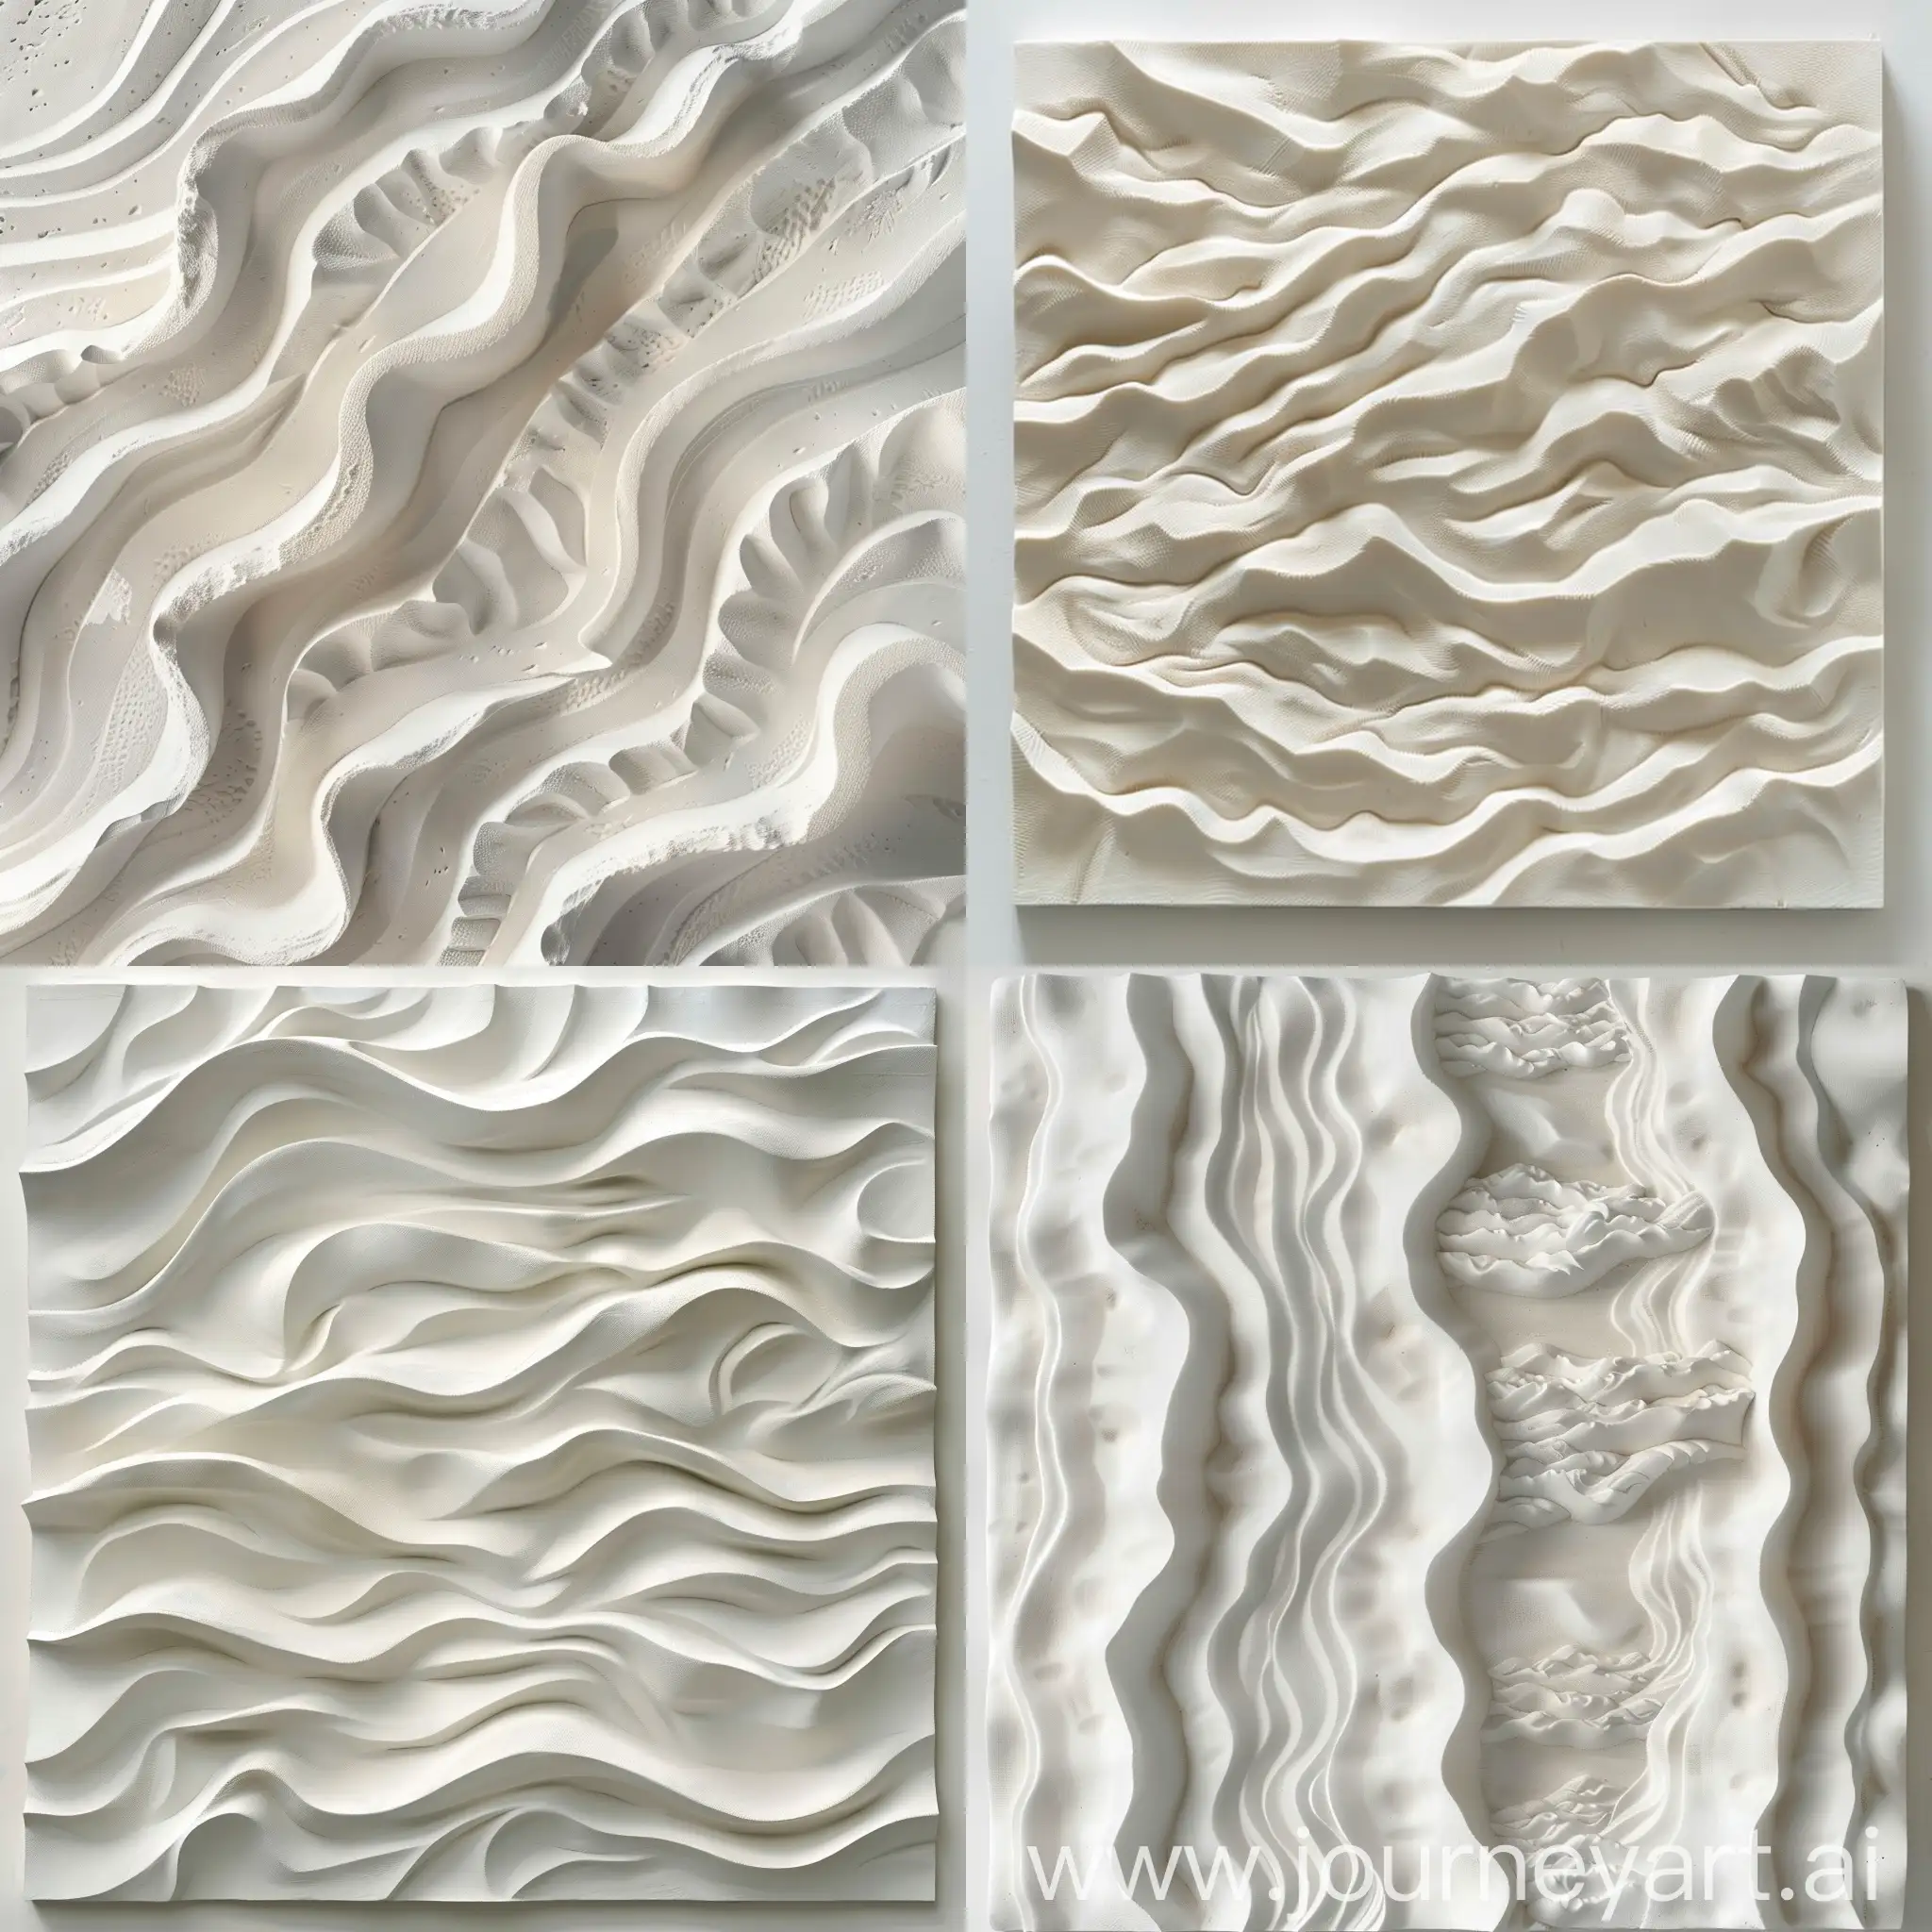 White-Sand-Dunes-Relief-Art-Aerial-Perspective-of-Textured-Landscape